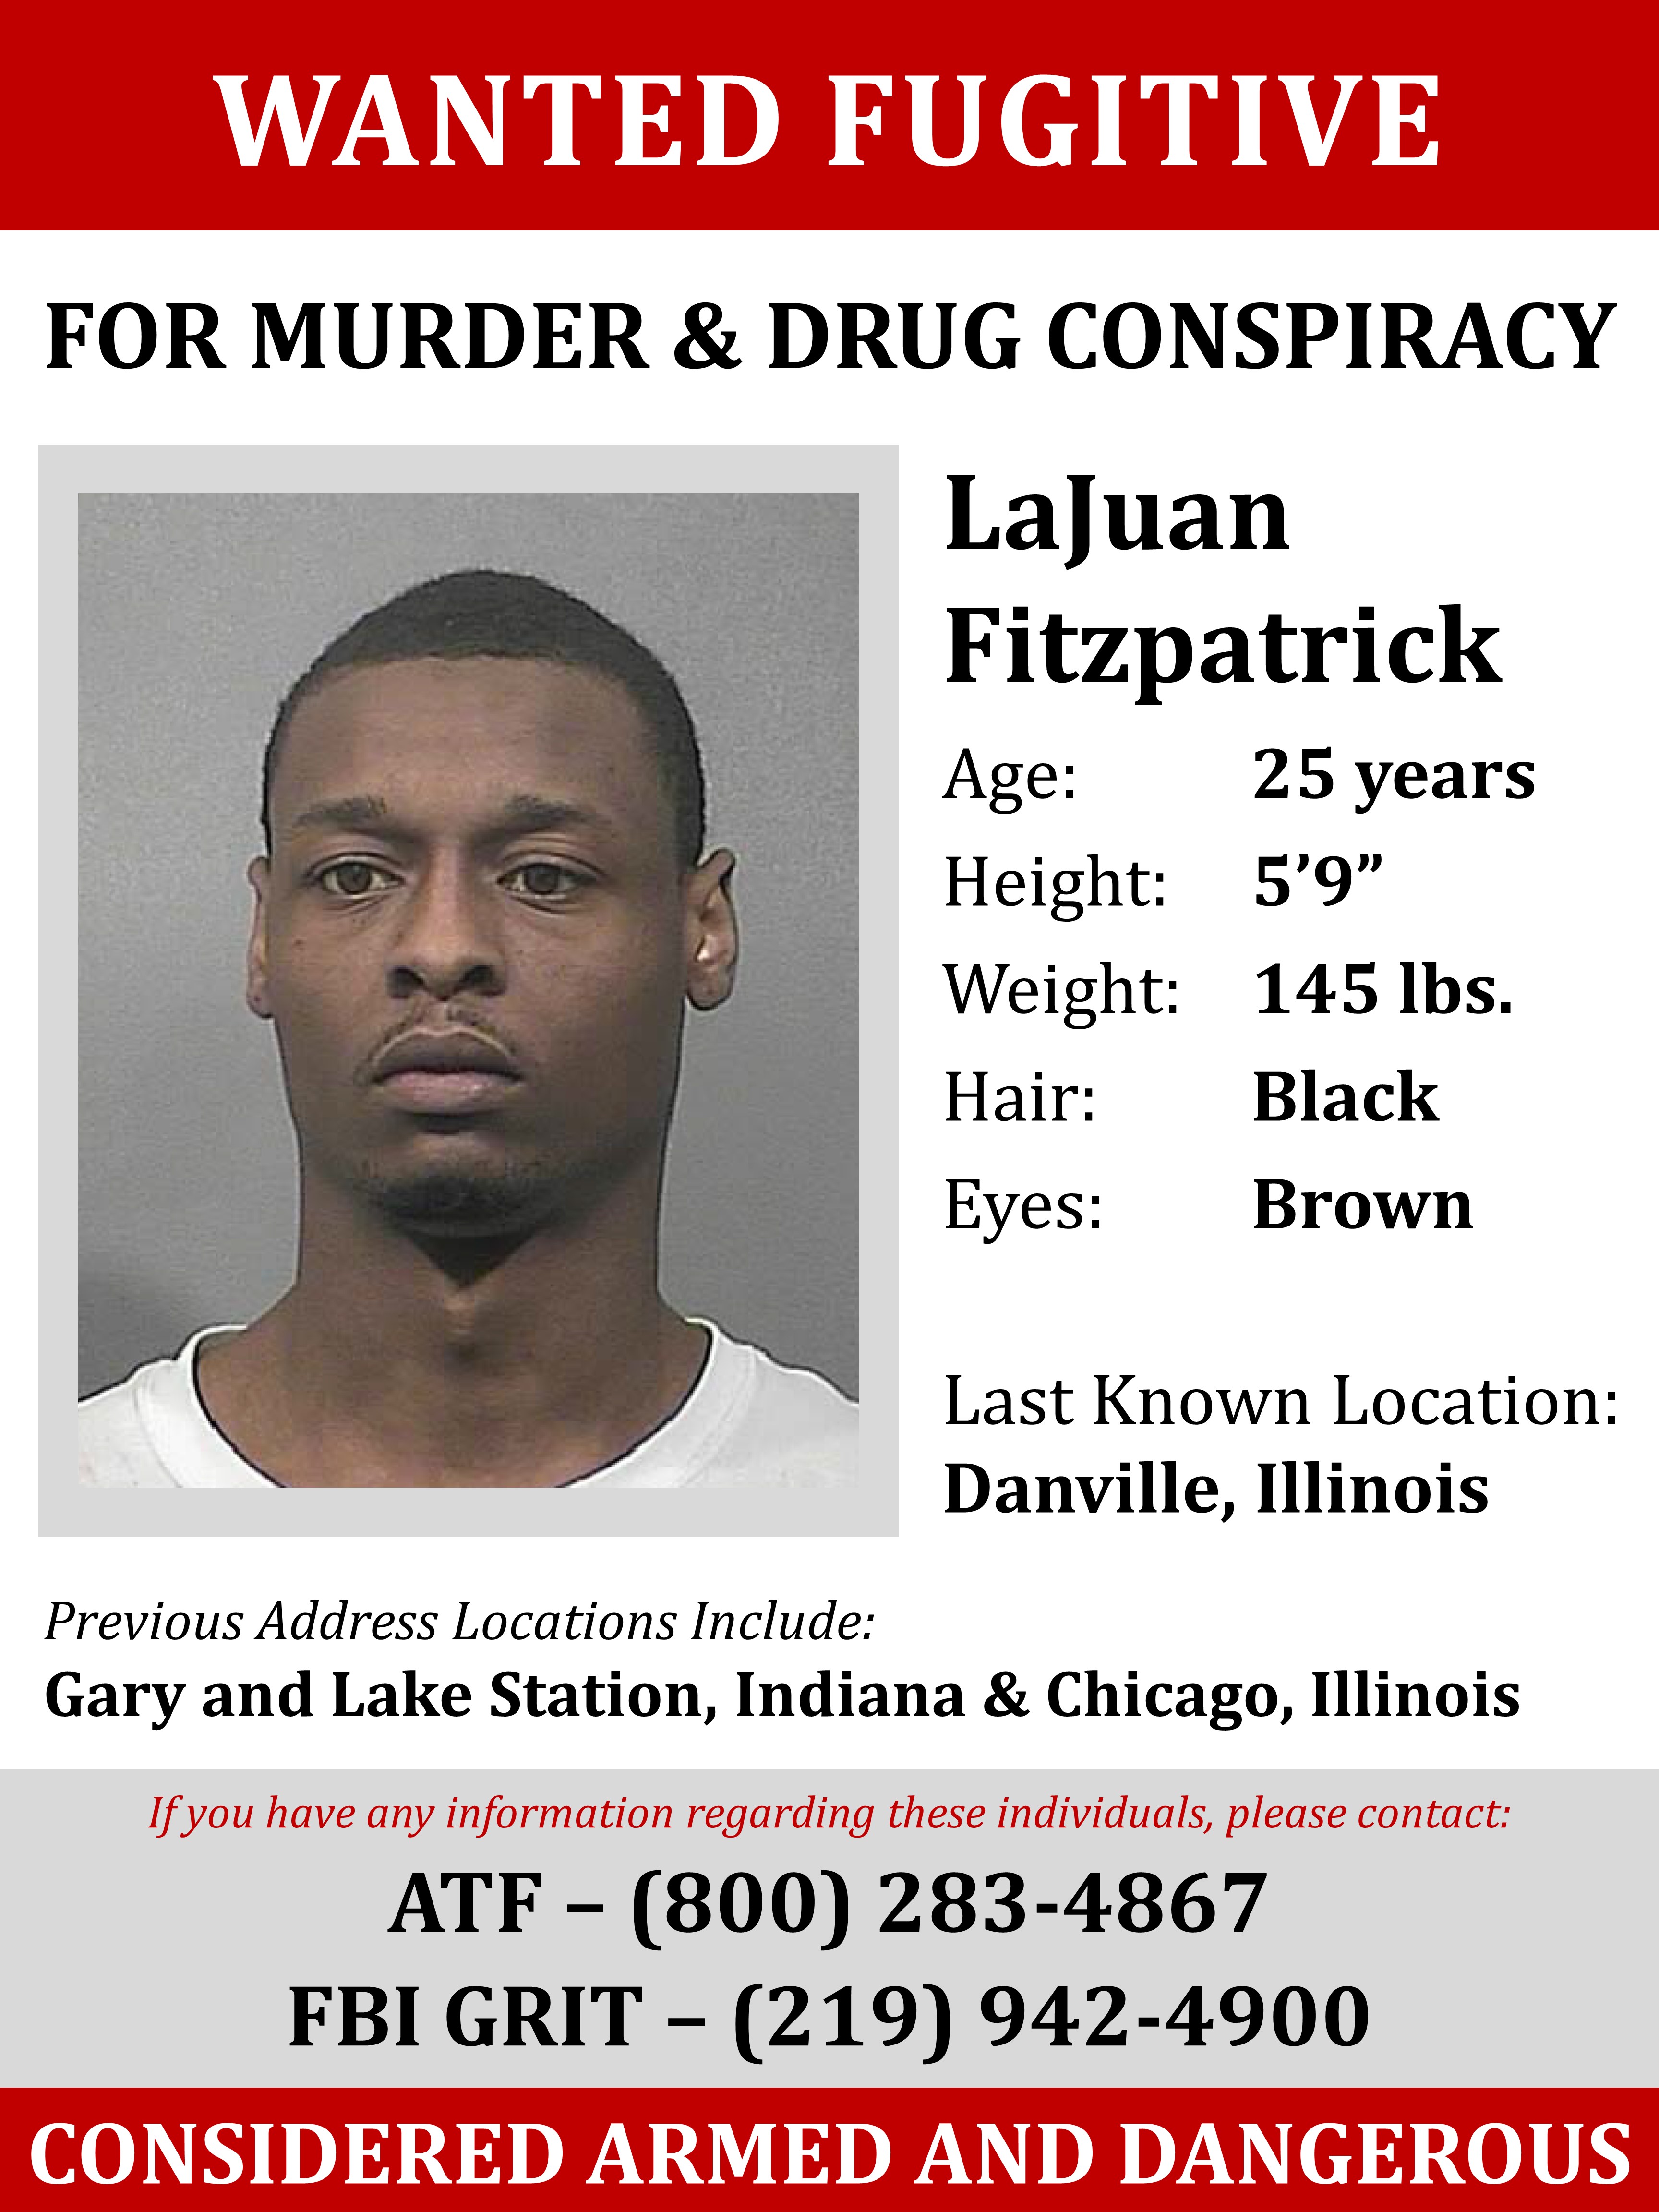 Wanted fugitive LaJuan Fitzpatrick is wanted for murder and drug conspiracy. He is considered armed and dangerous. 